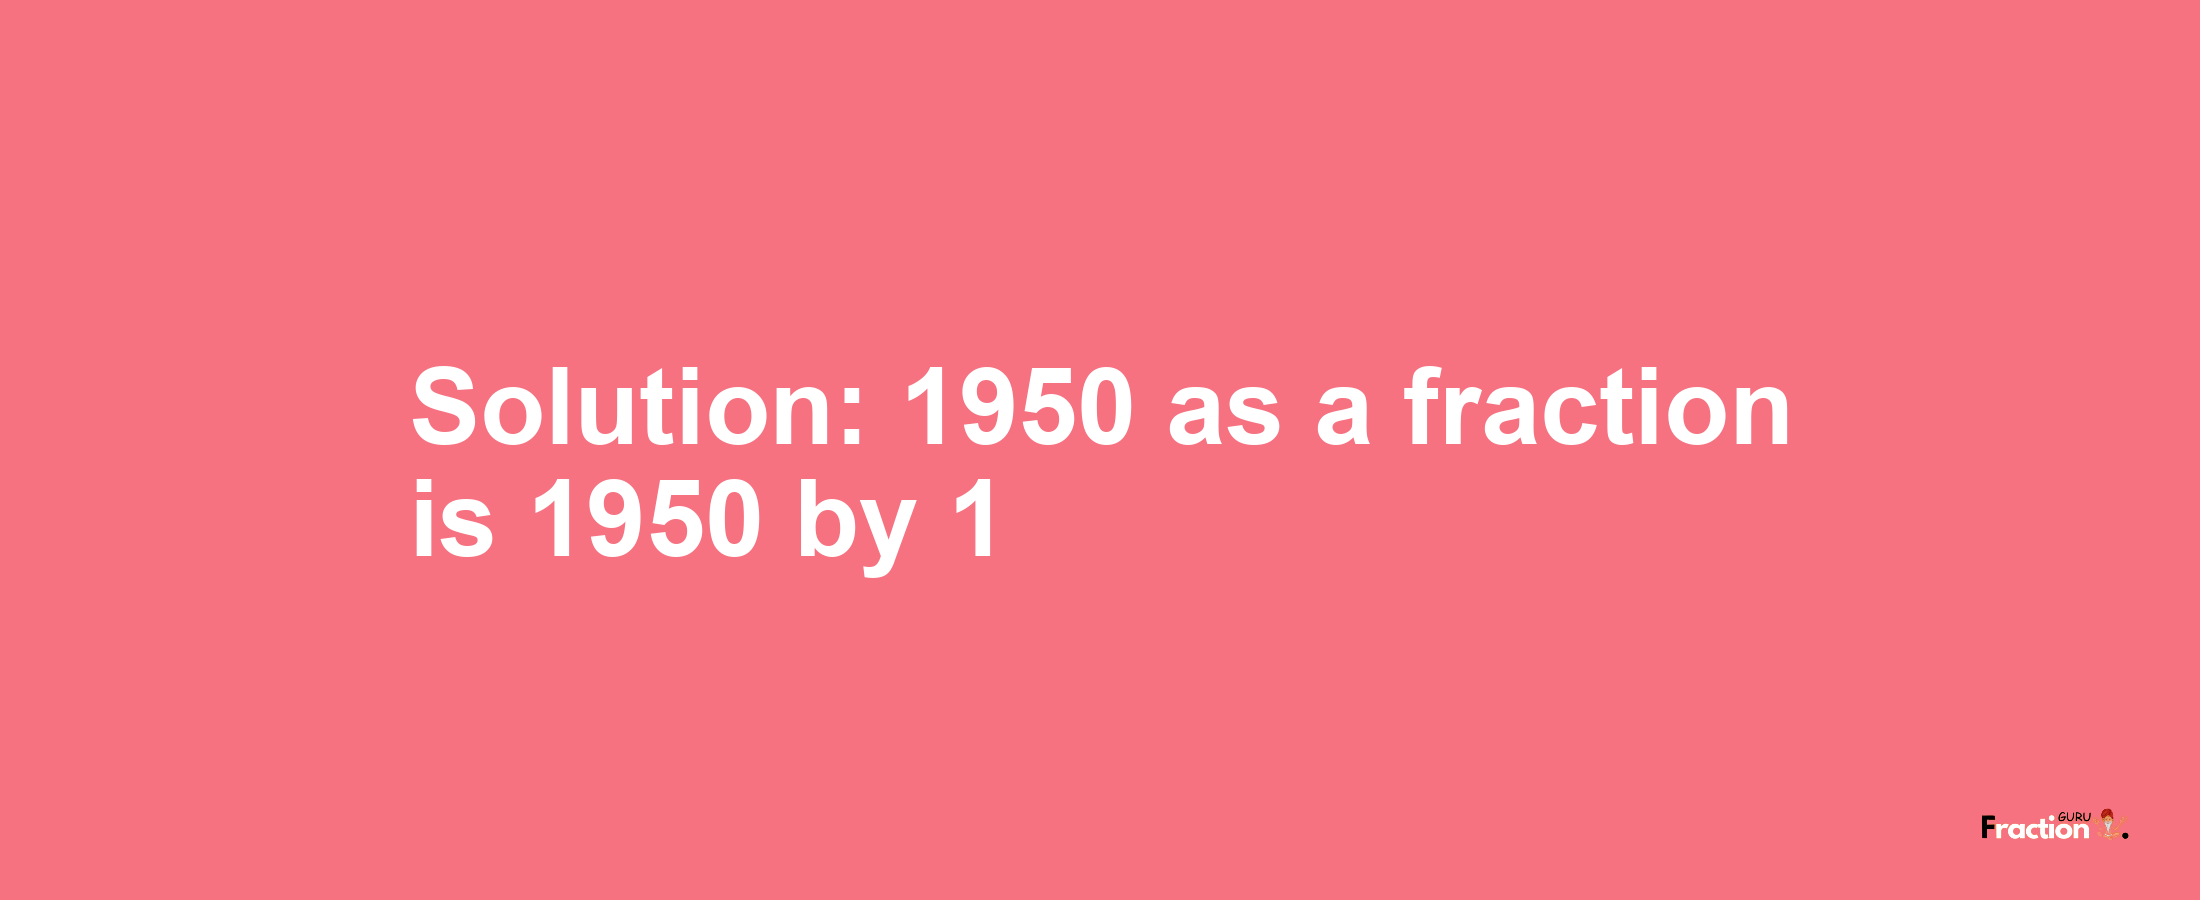 Solution:1950 as a fraction is 1950/1